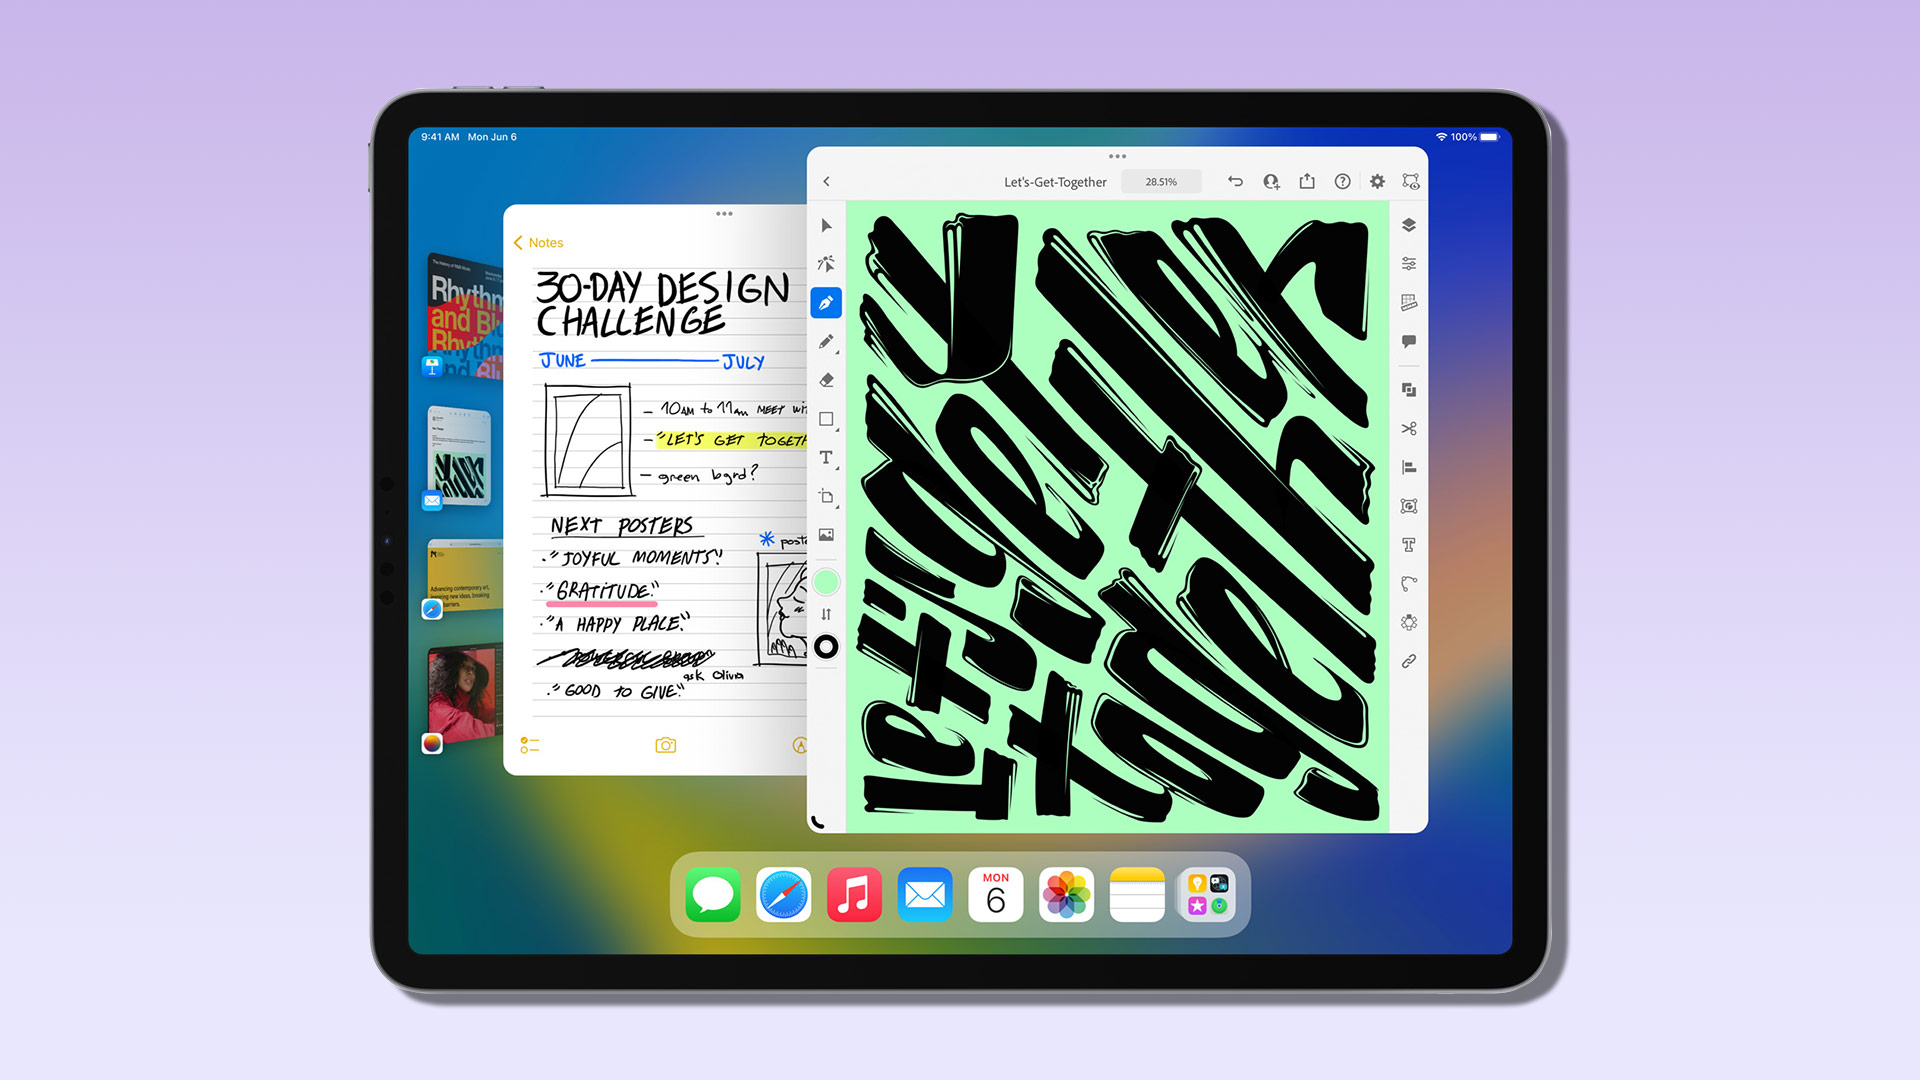 iPadOS 16 on iPad shows Create Stage Manager with nested windows of different sizes